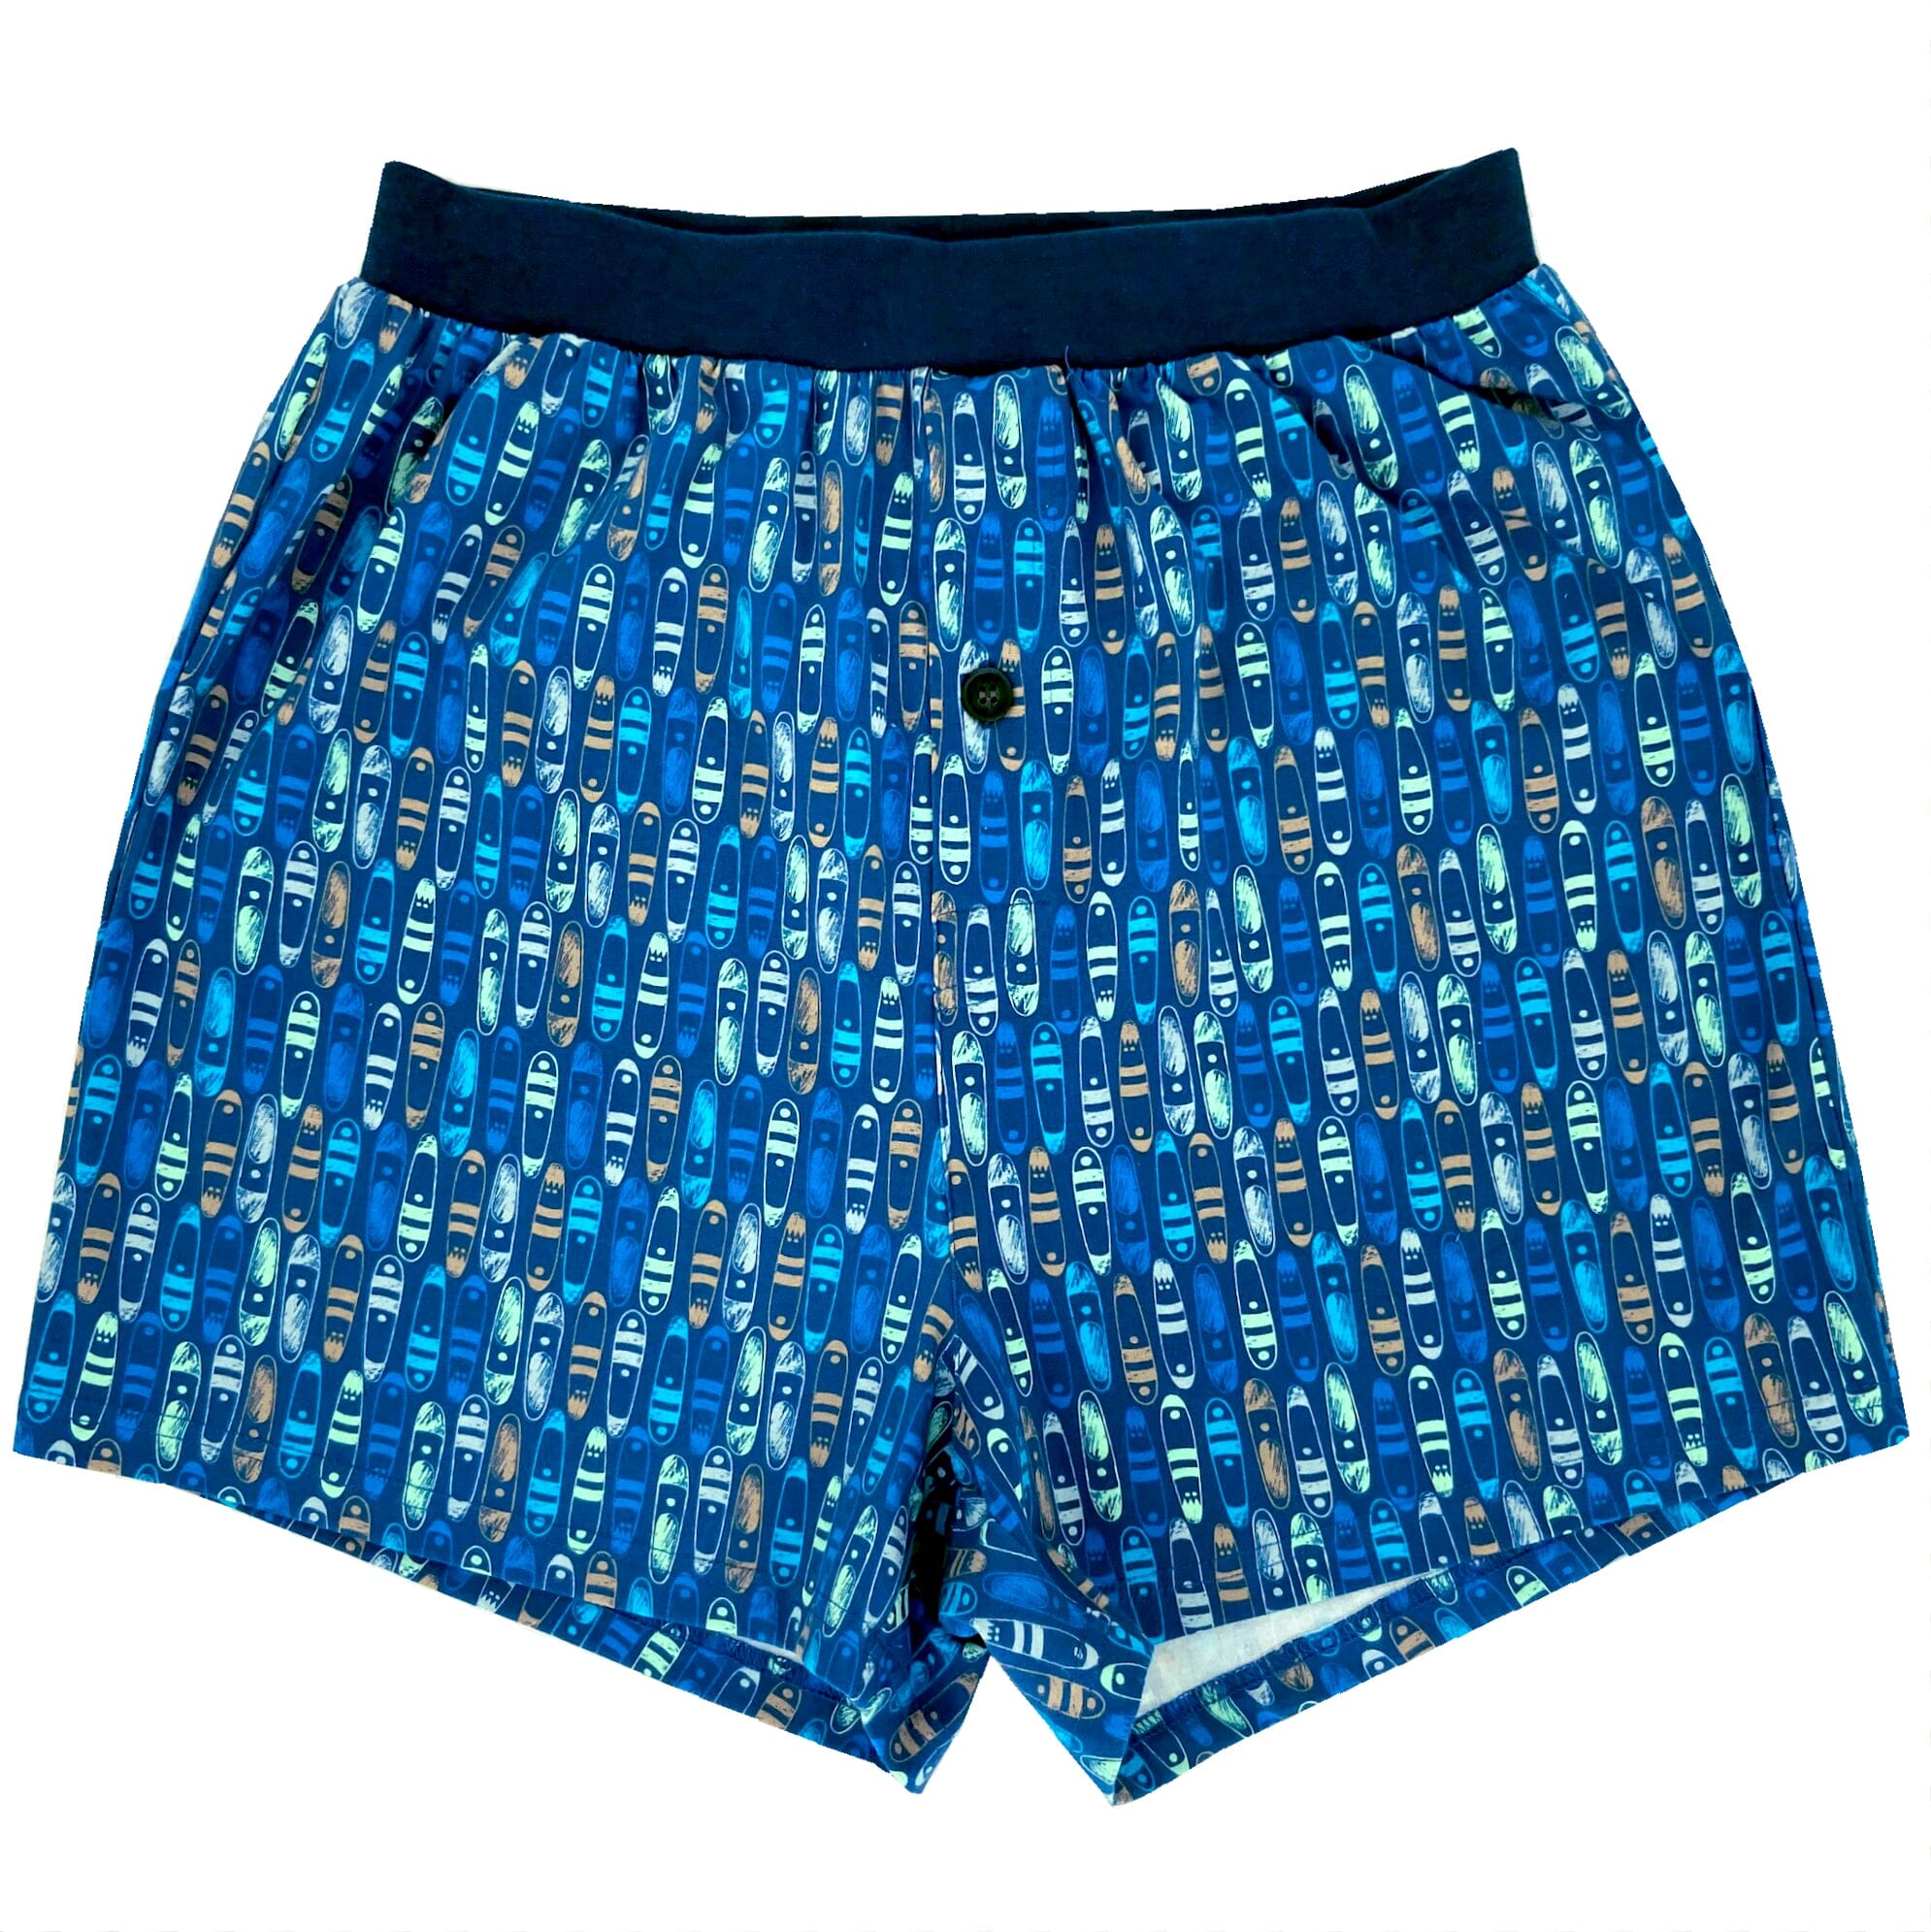 Comfy Sleepwear Surfboard All Over Print Cotton Pajama Boxer Shorts for Men